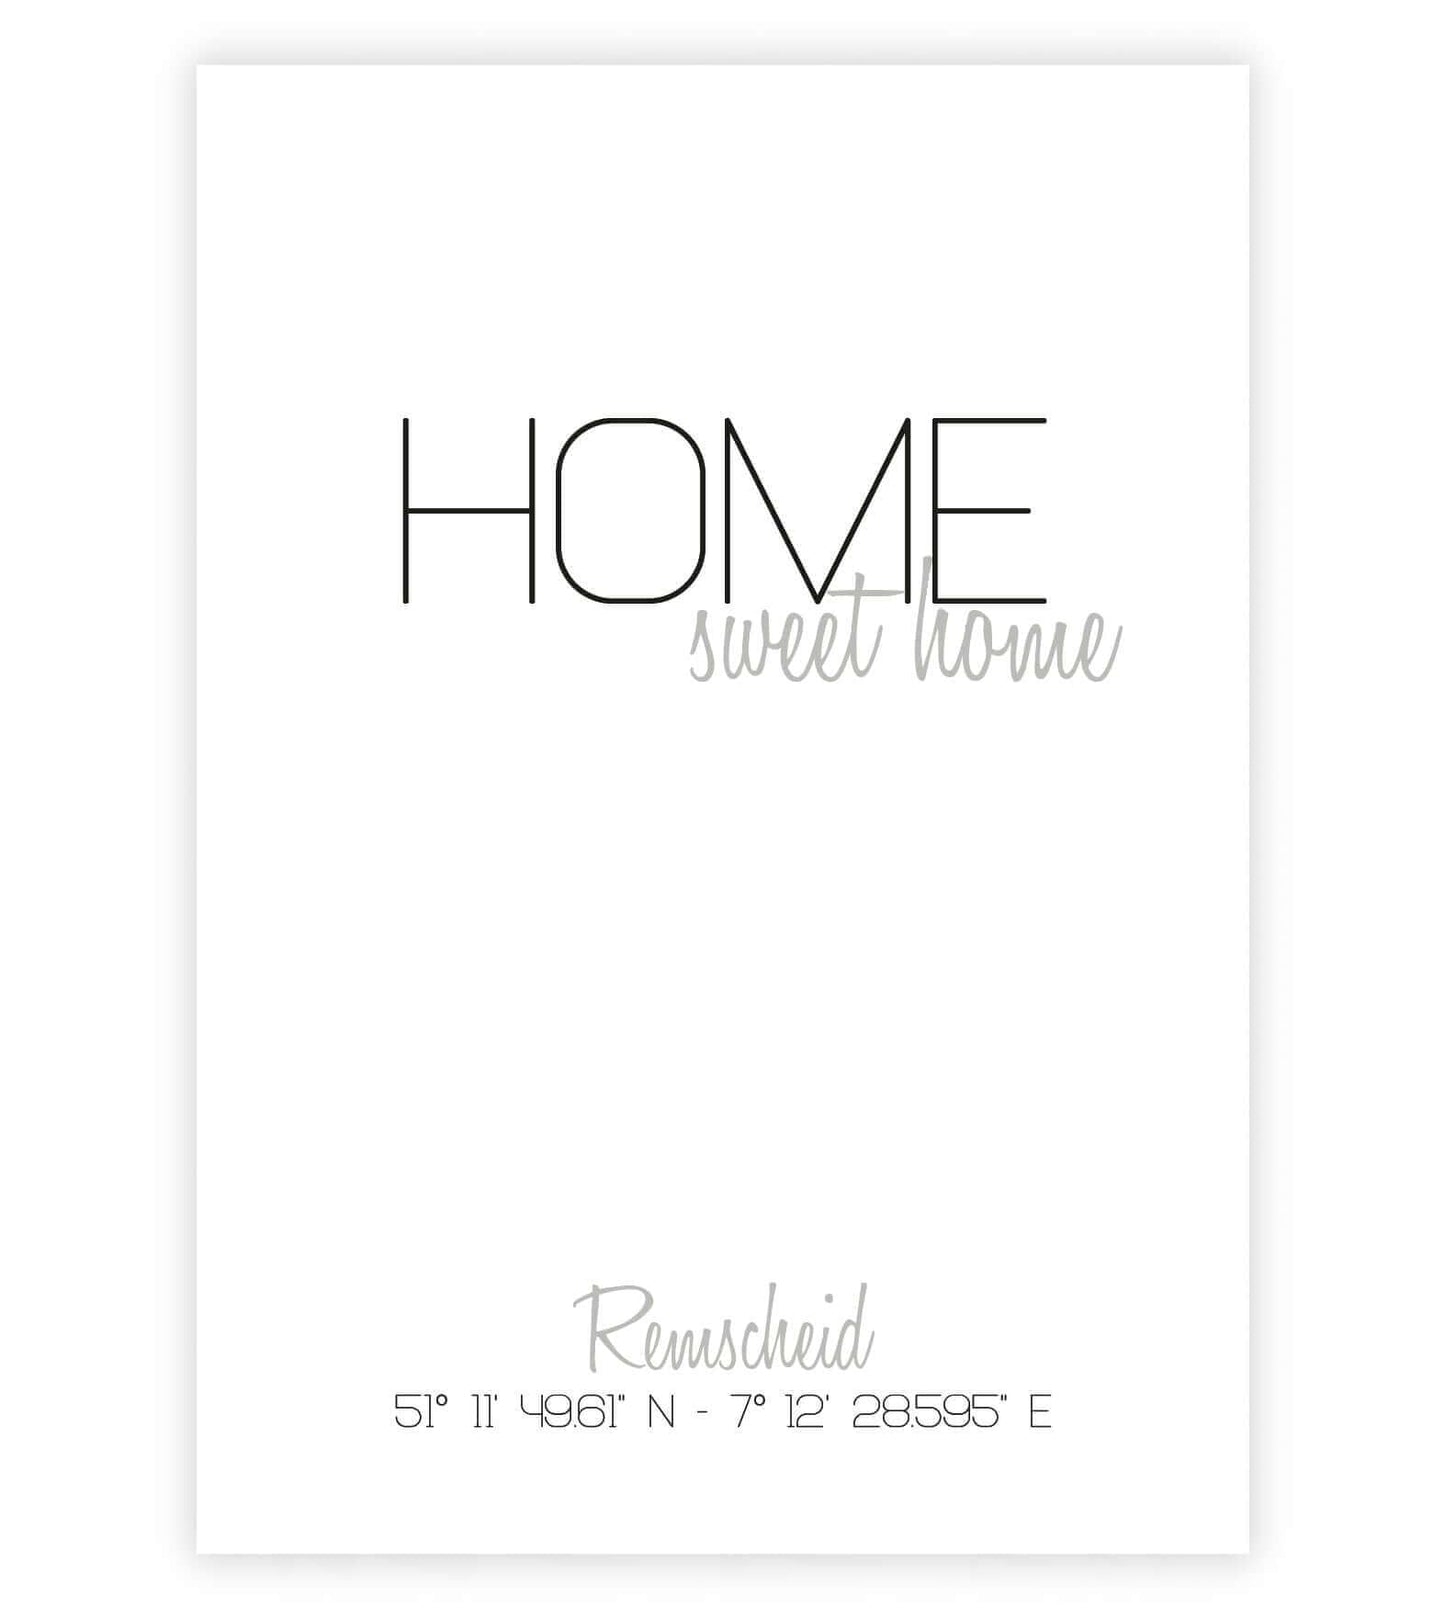 Personalized coordinate picture "HOME sweet home"